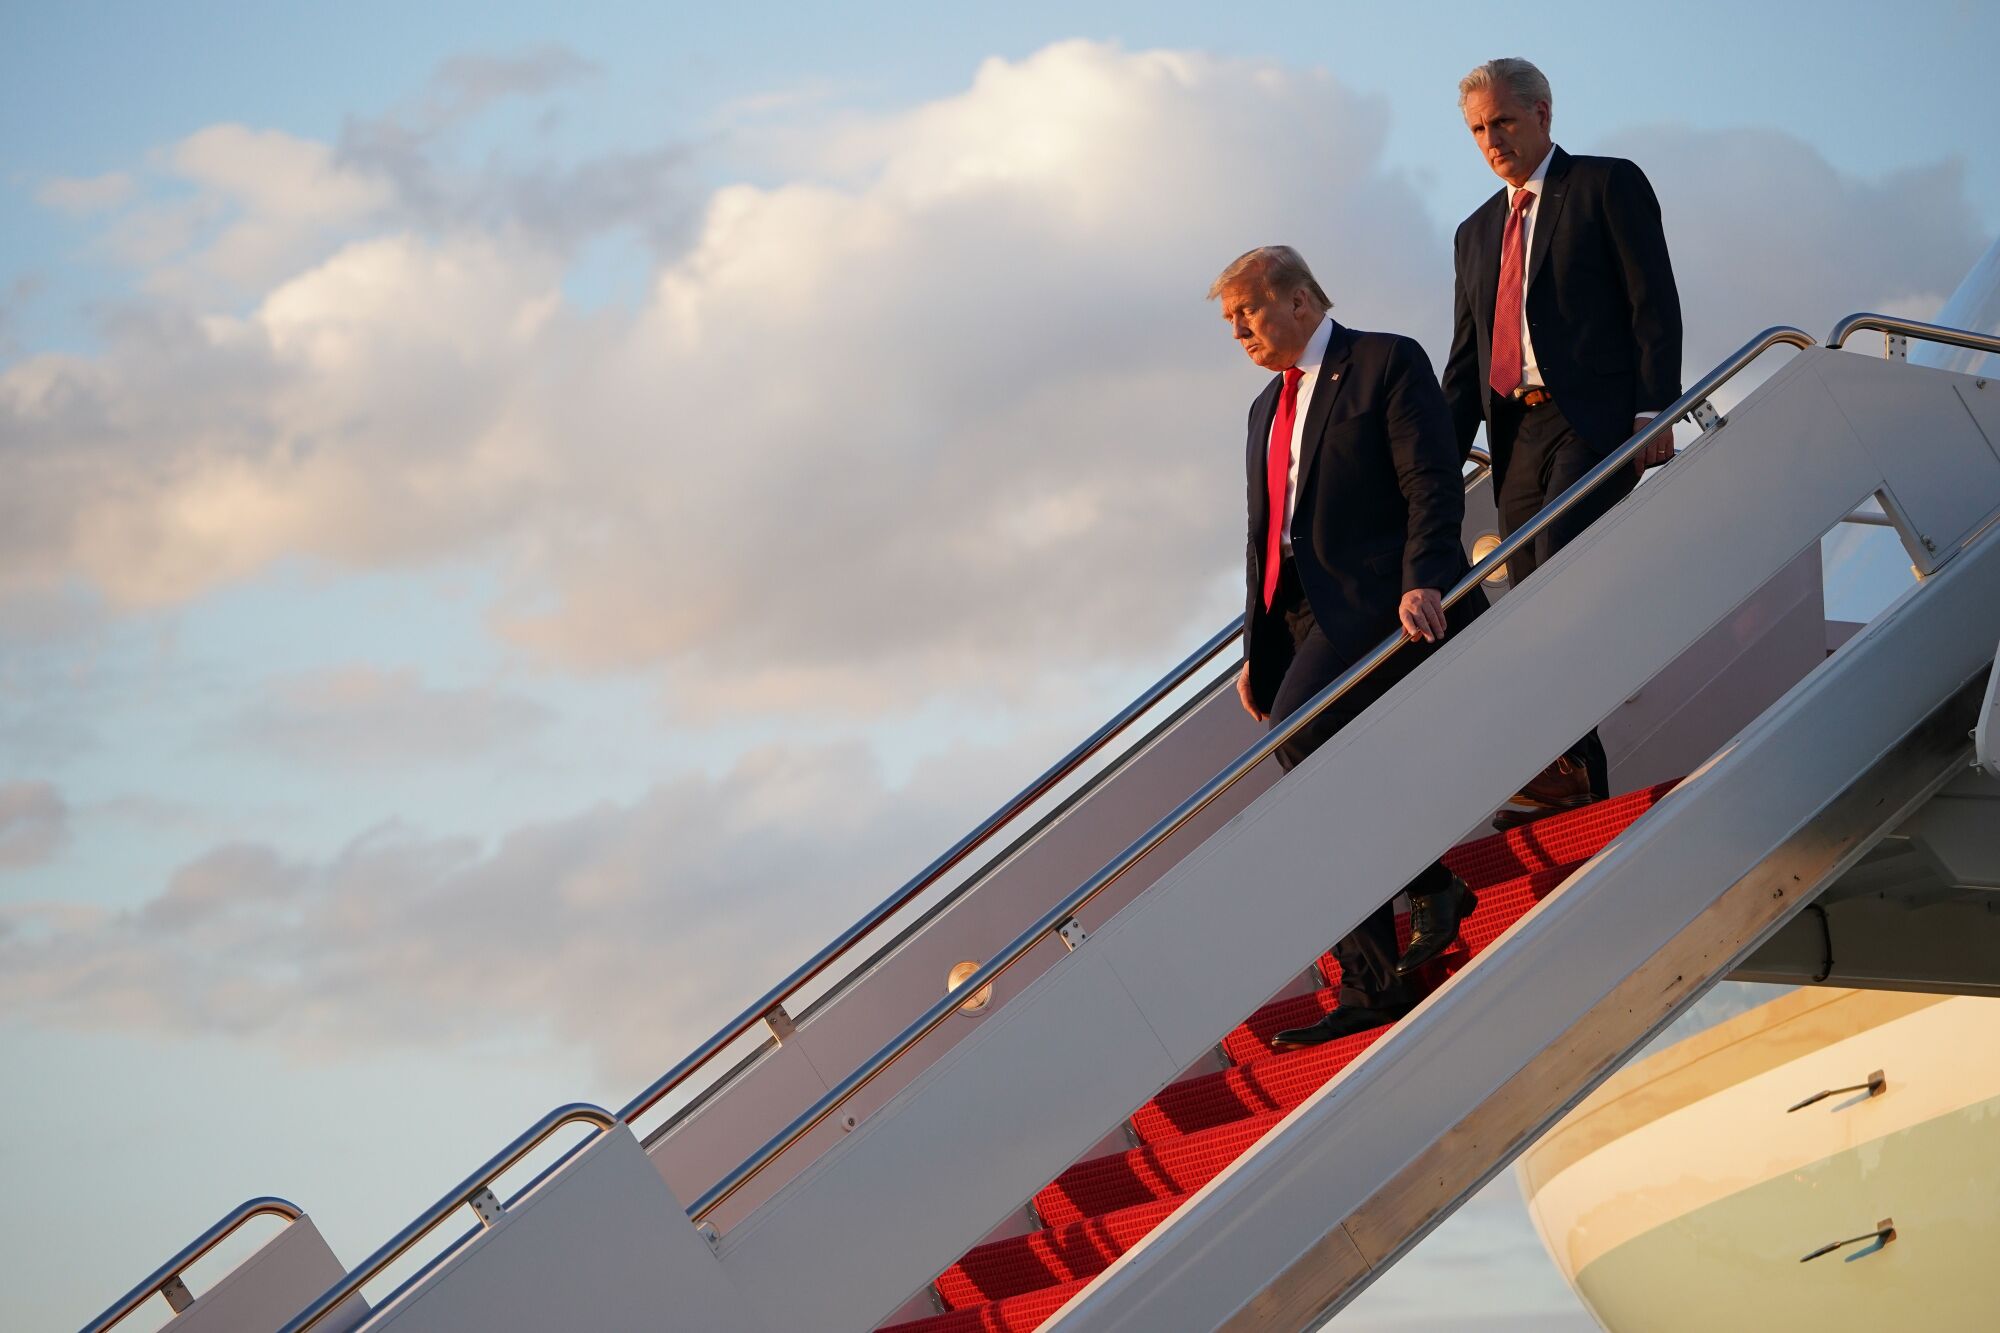 Two men walk down steps from a plane.